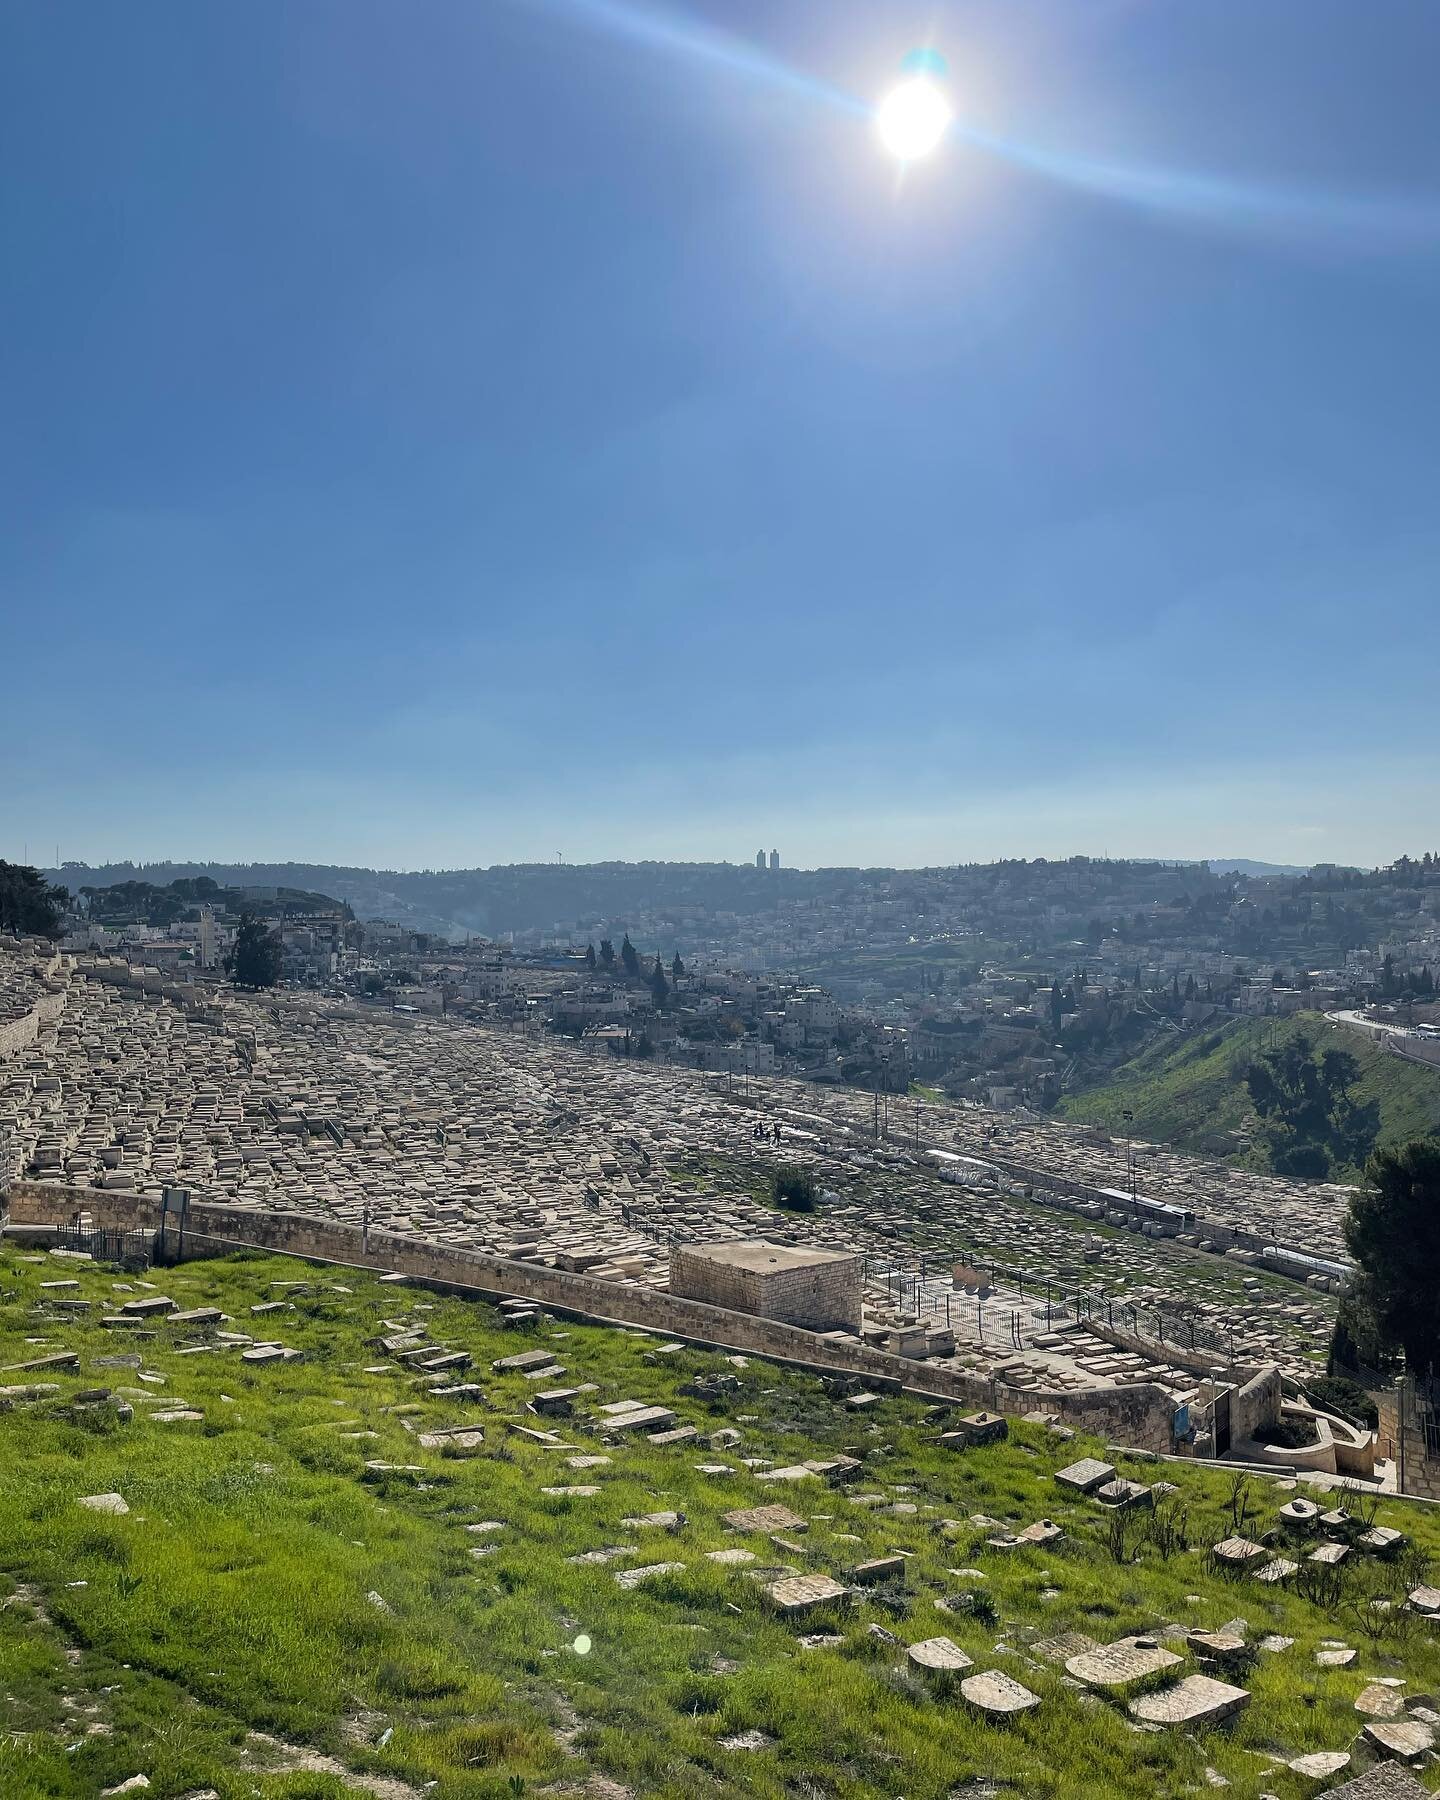 Sounds of the Holy Land episode photo album: part 2.
As you listen to episode 207, these are the pictures that go with the last 12 sounds. @nterfa @chanofthewoods @eliastourstheholyland